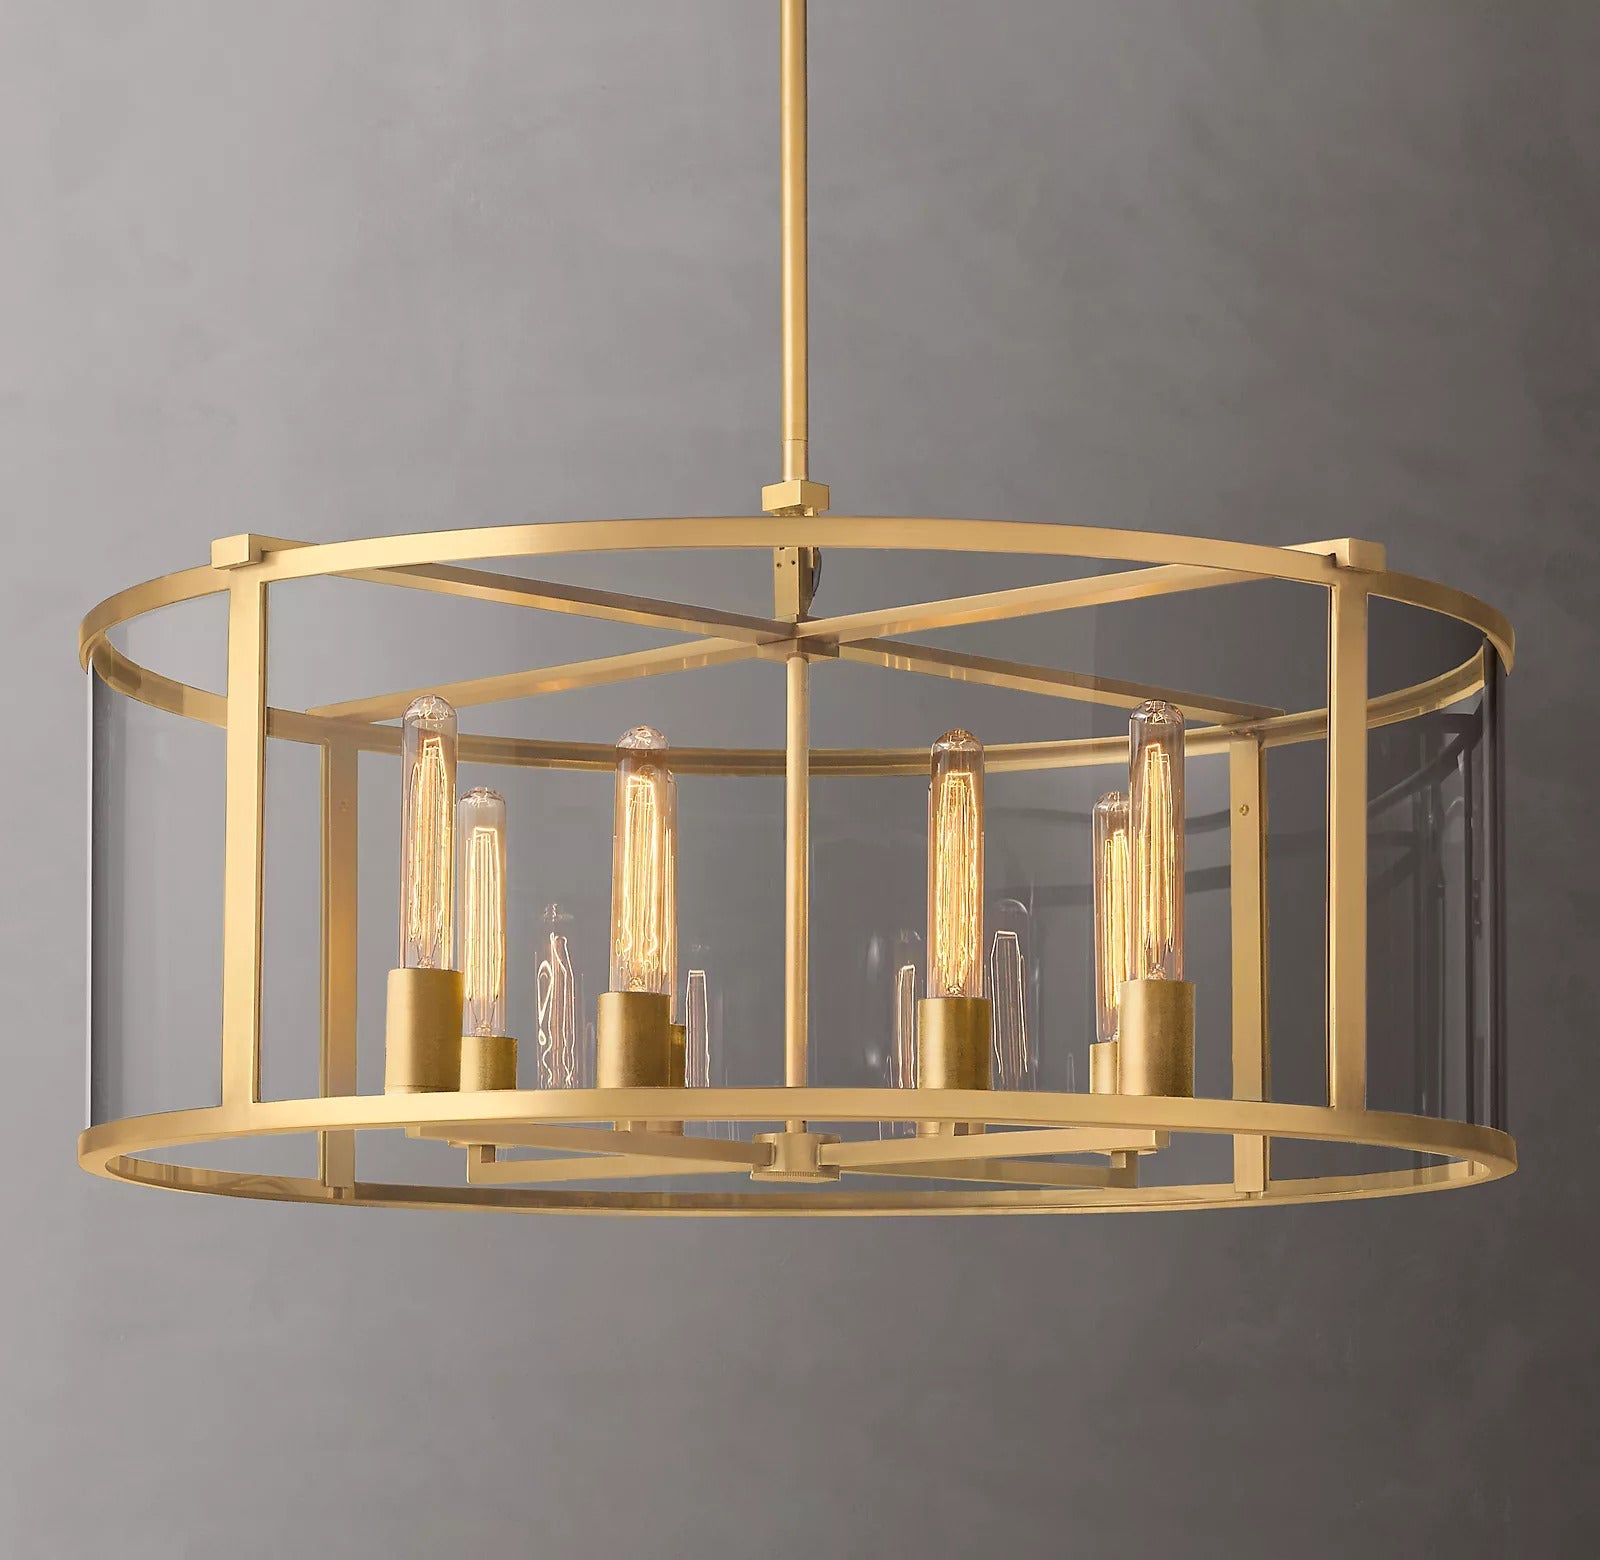 Michael Beck Round Chandelier 33" For Living Room-alimialighting